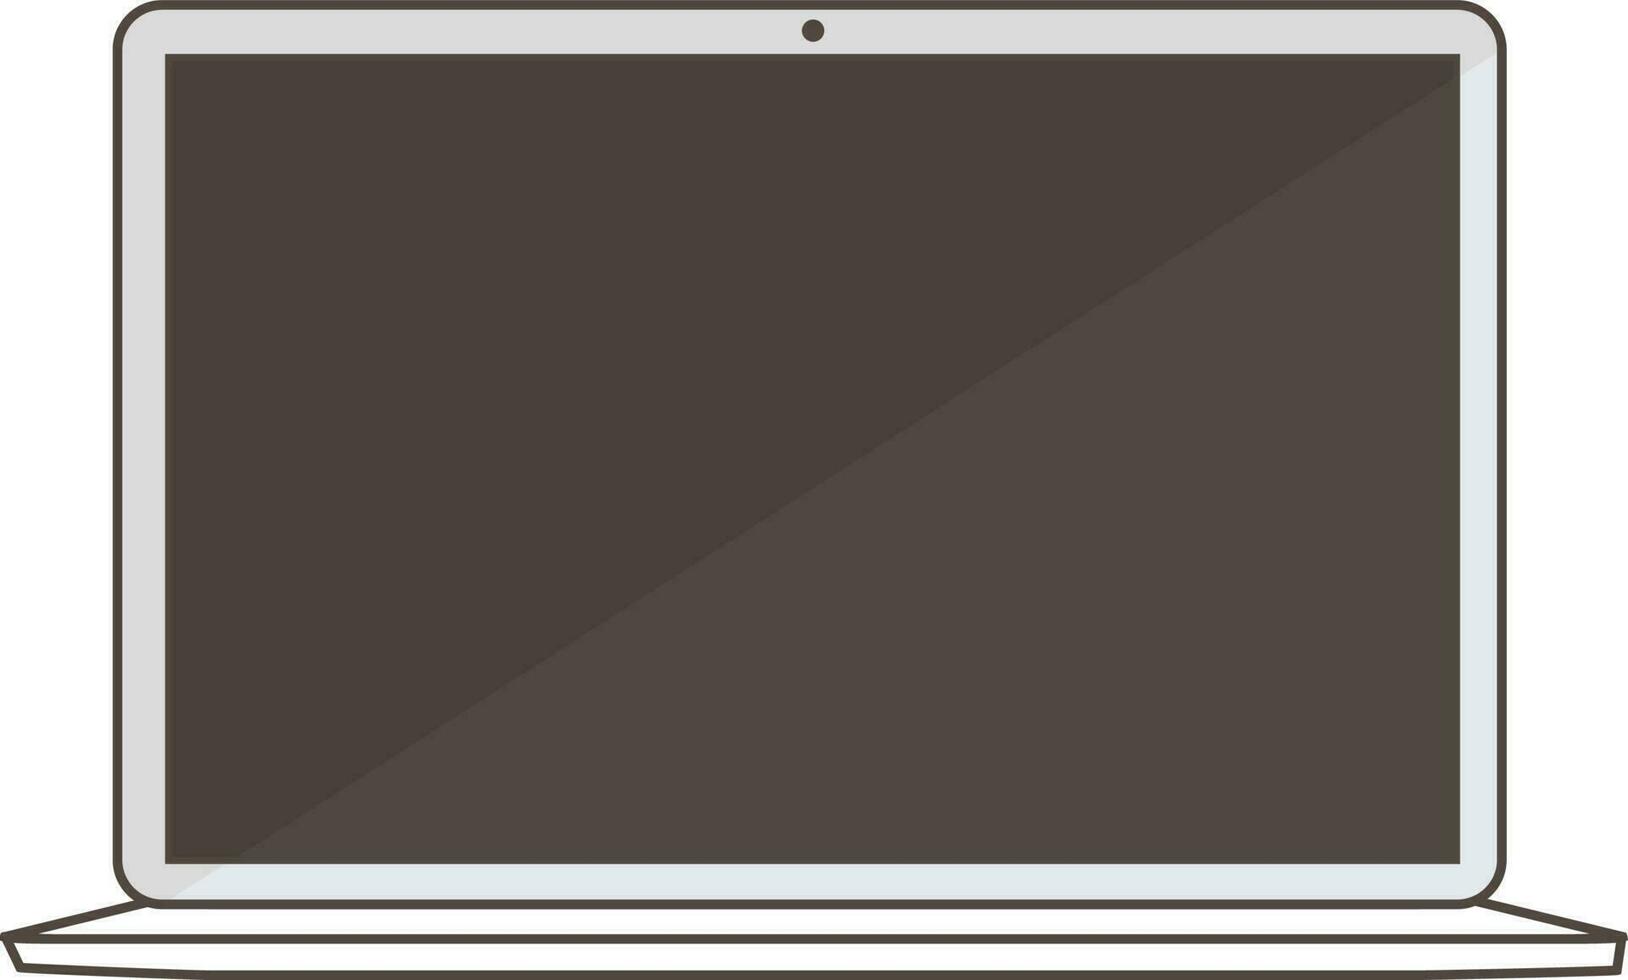 Flat style screen of a laptop. vector